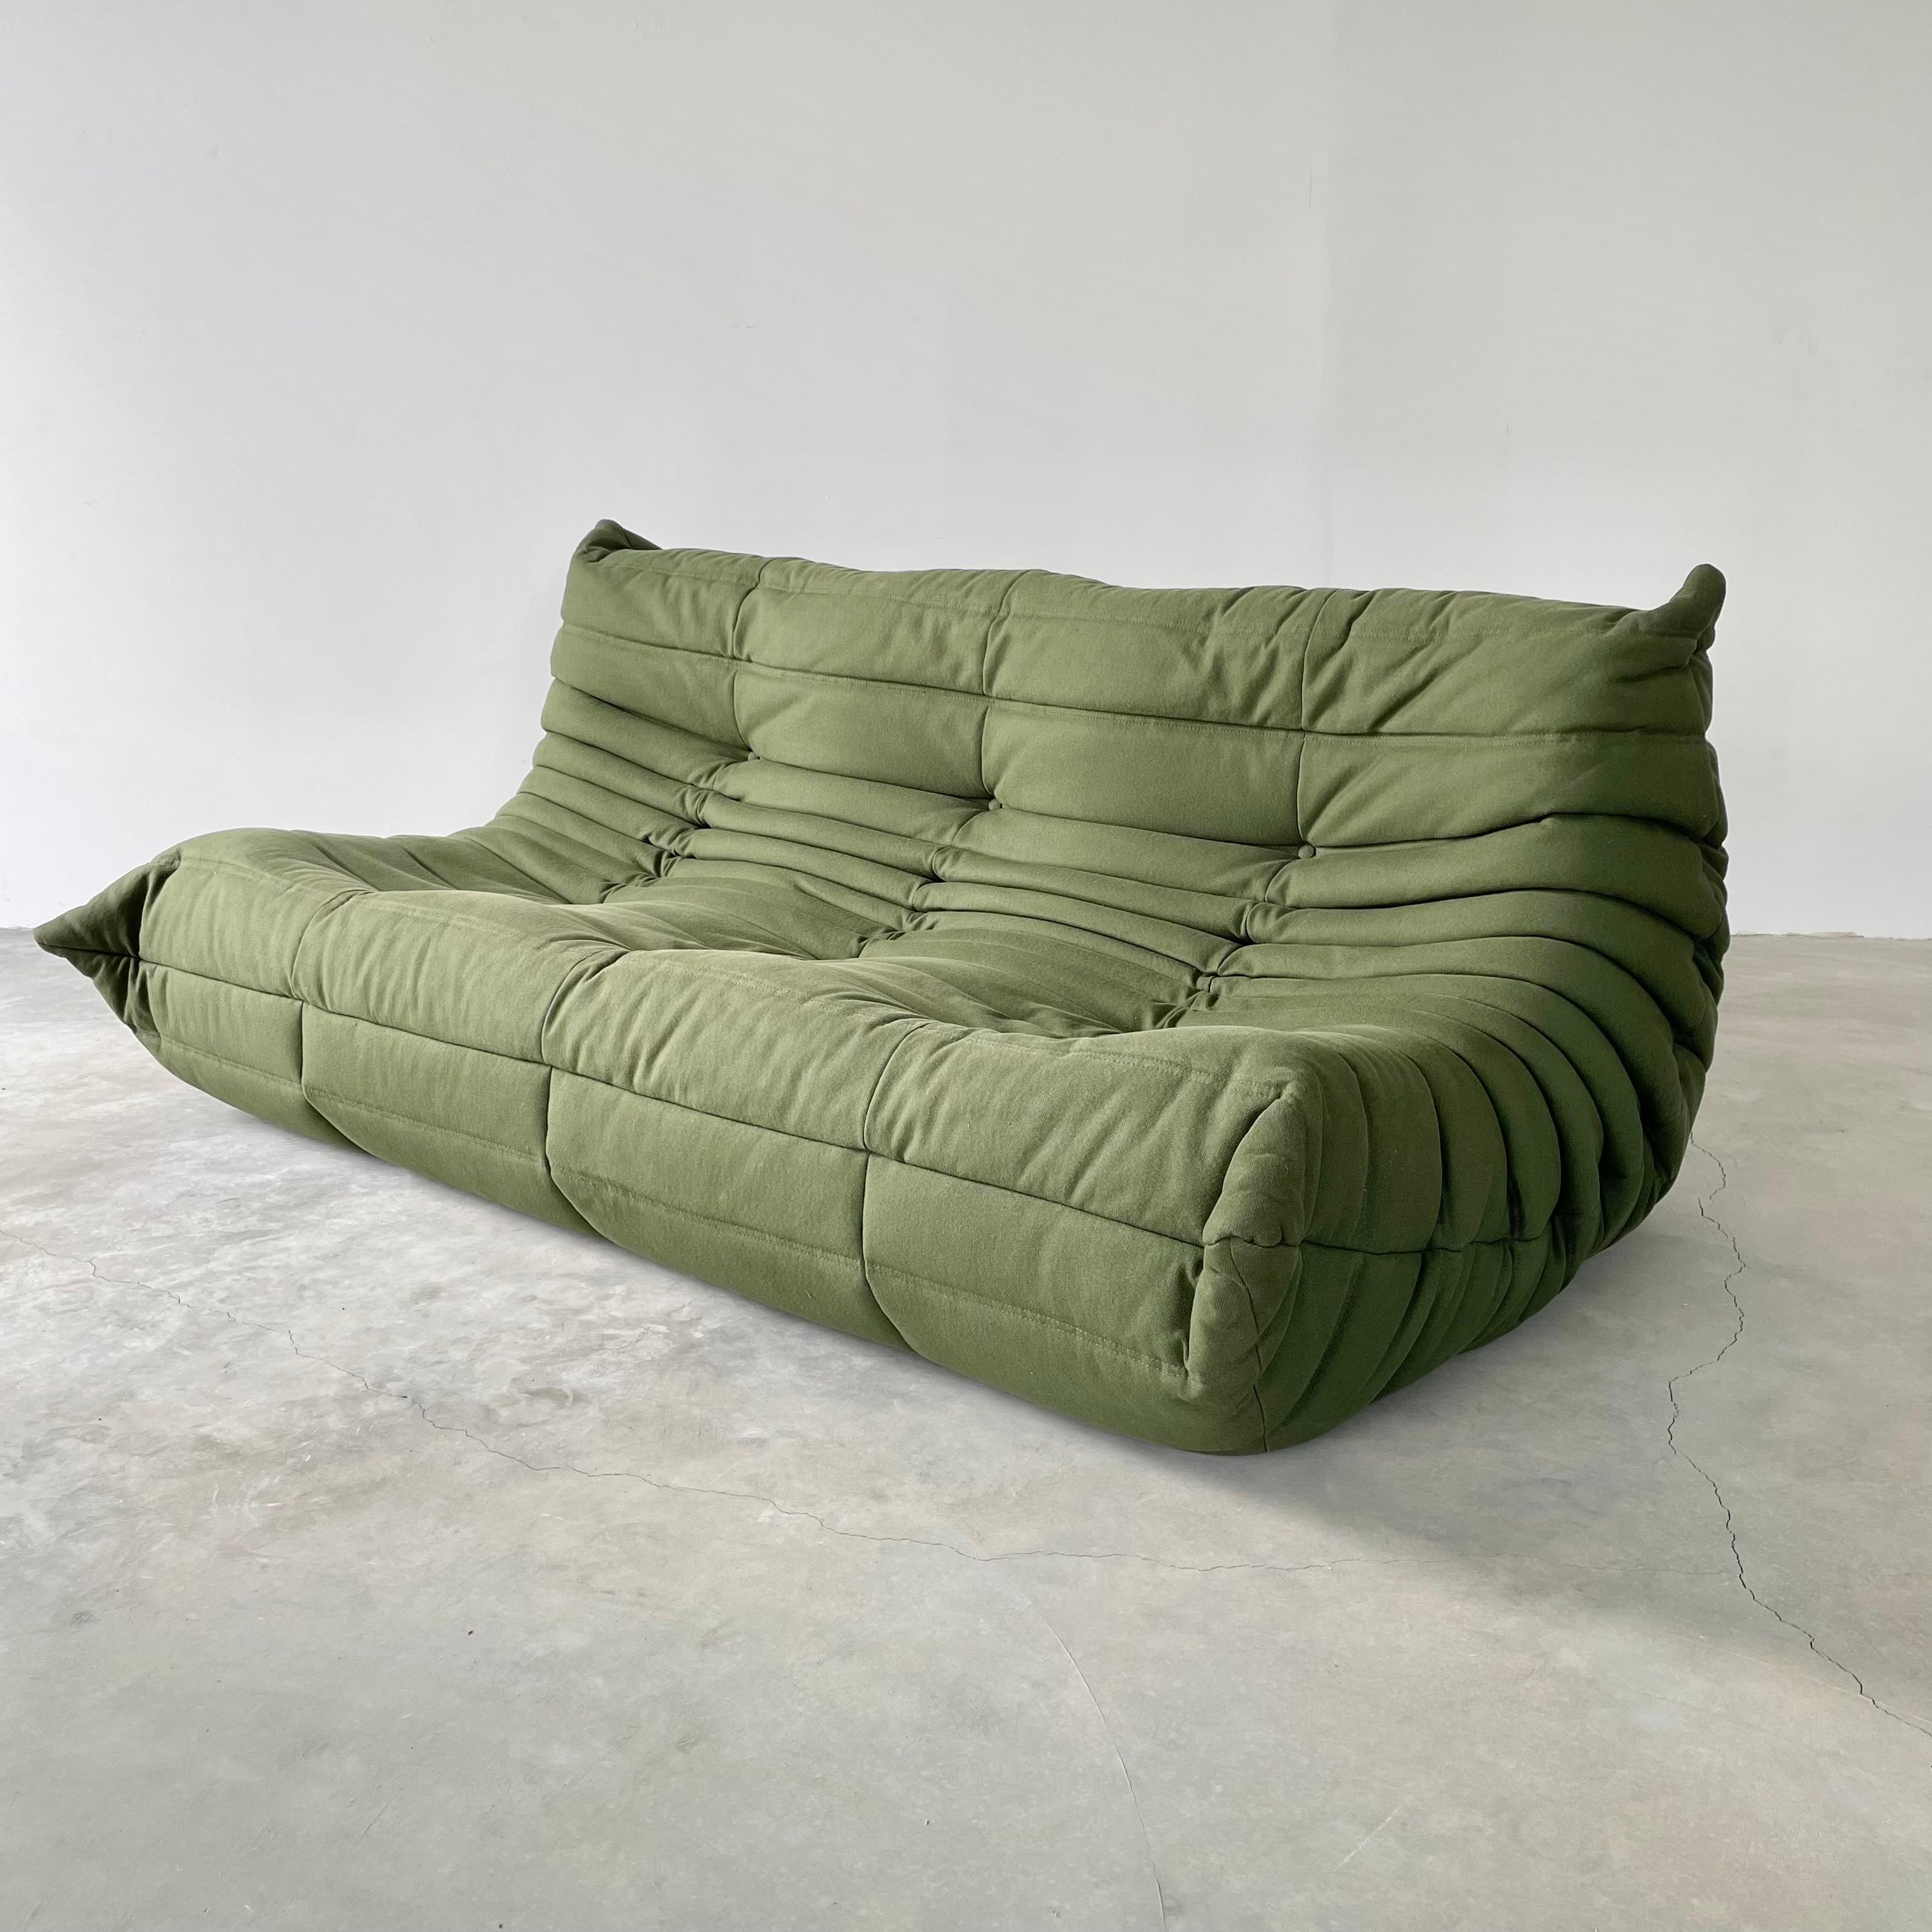 Classic French Togo sofa by Michel Ducaroy for luxury brand Ligne Roset. Originally designed in the 1970s the iconic togo sofa is now a design classic. This sofa comes in its original, hardly used, green canvas fabric

Timeless comfort and style